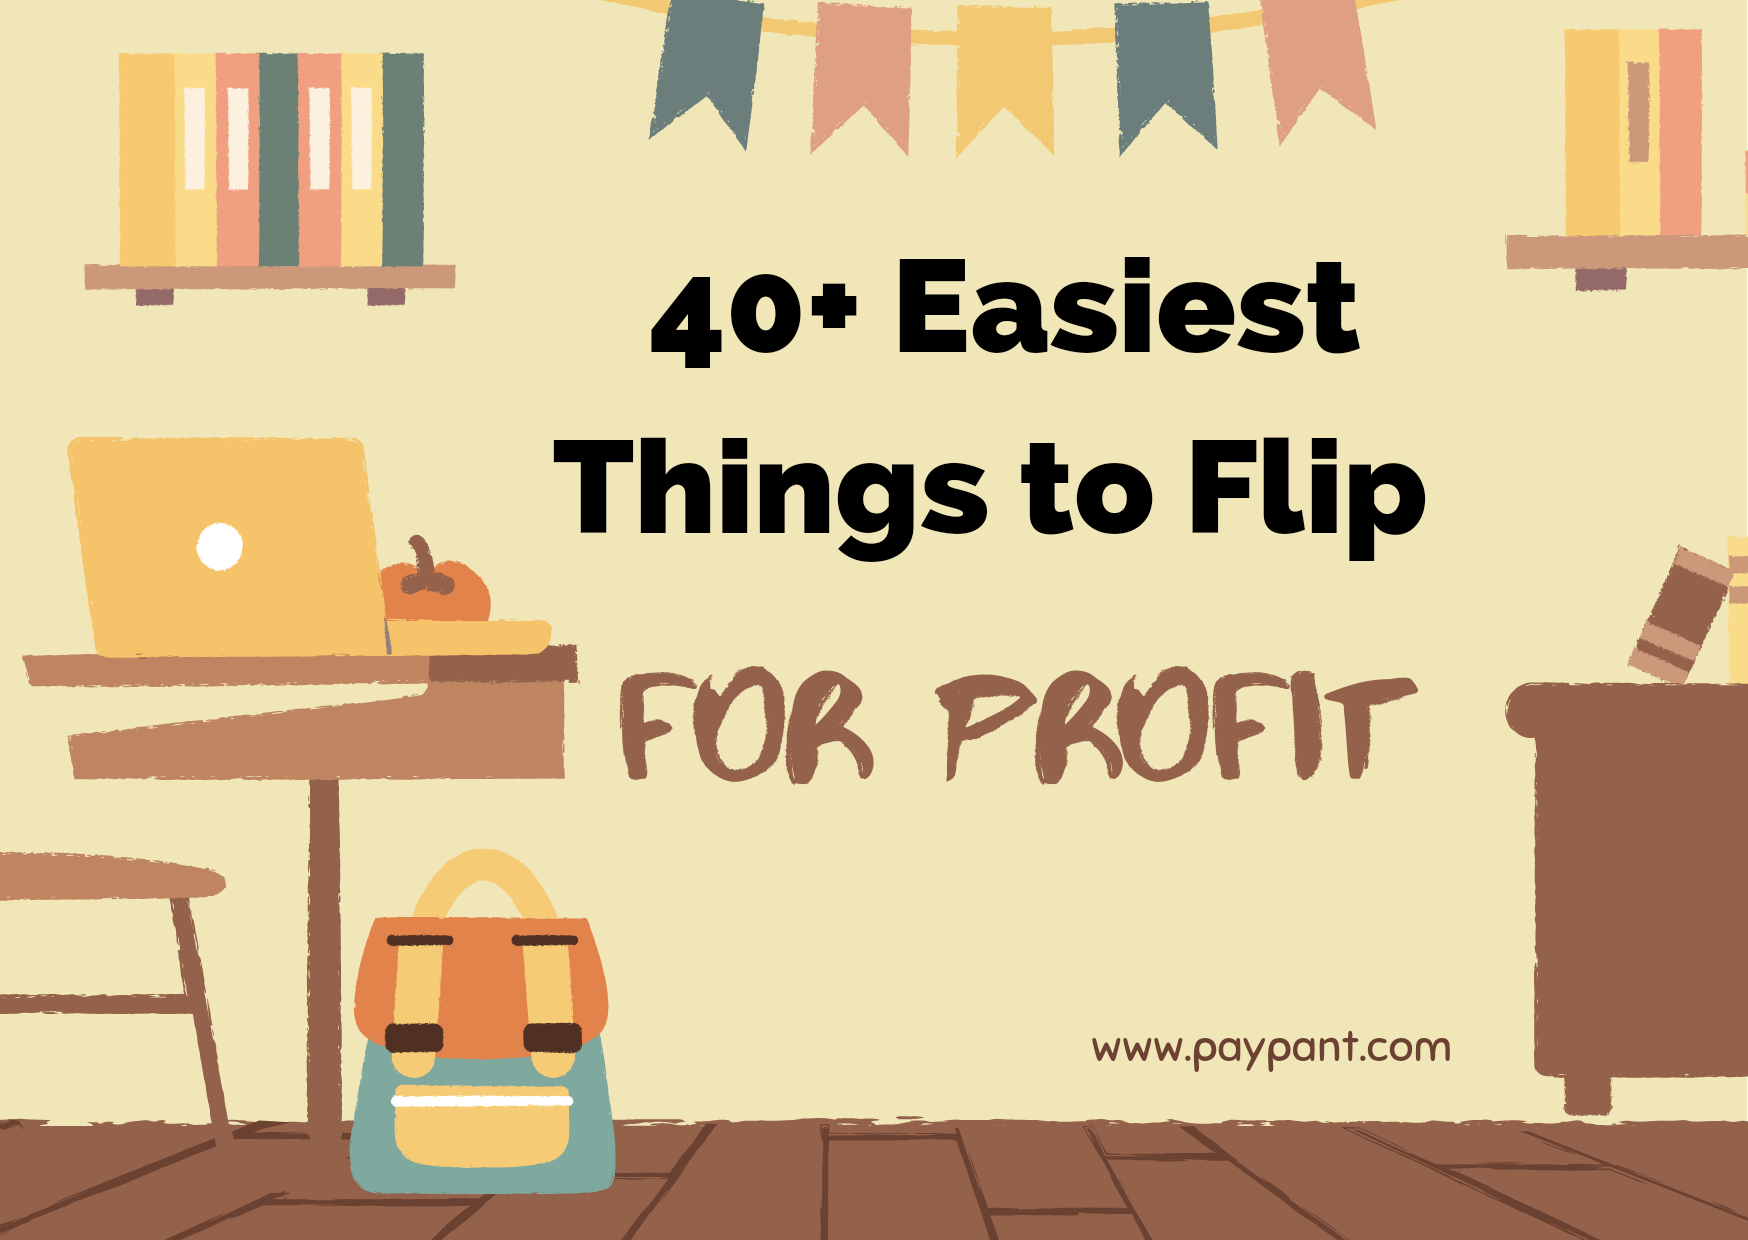 40+ easiest thing to flip for profit www.paypant.com